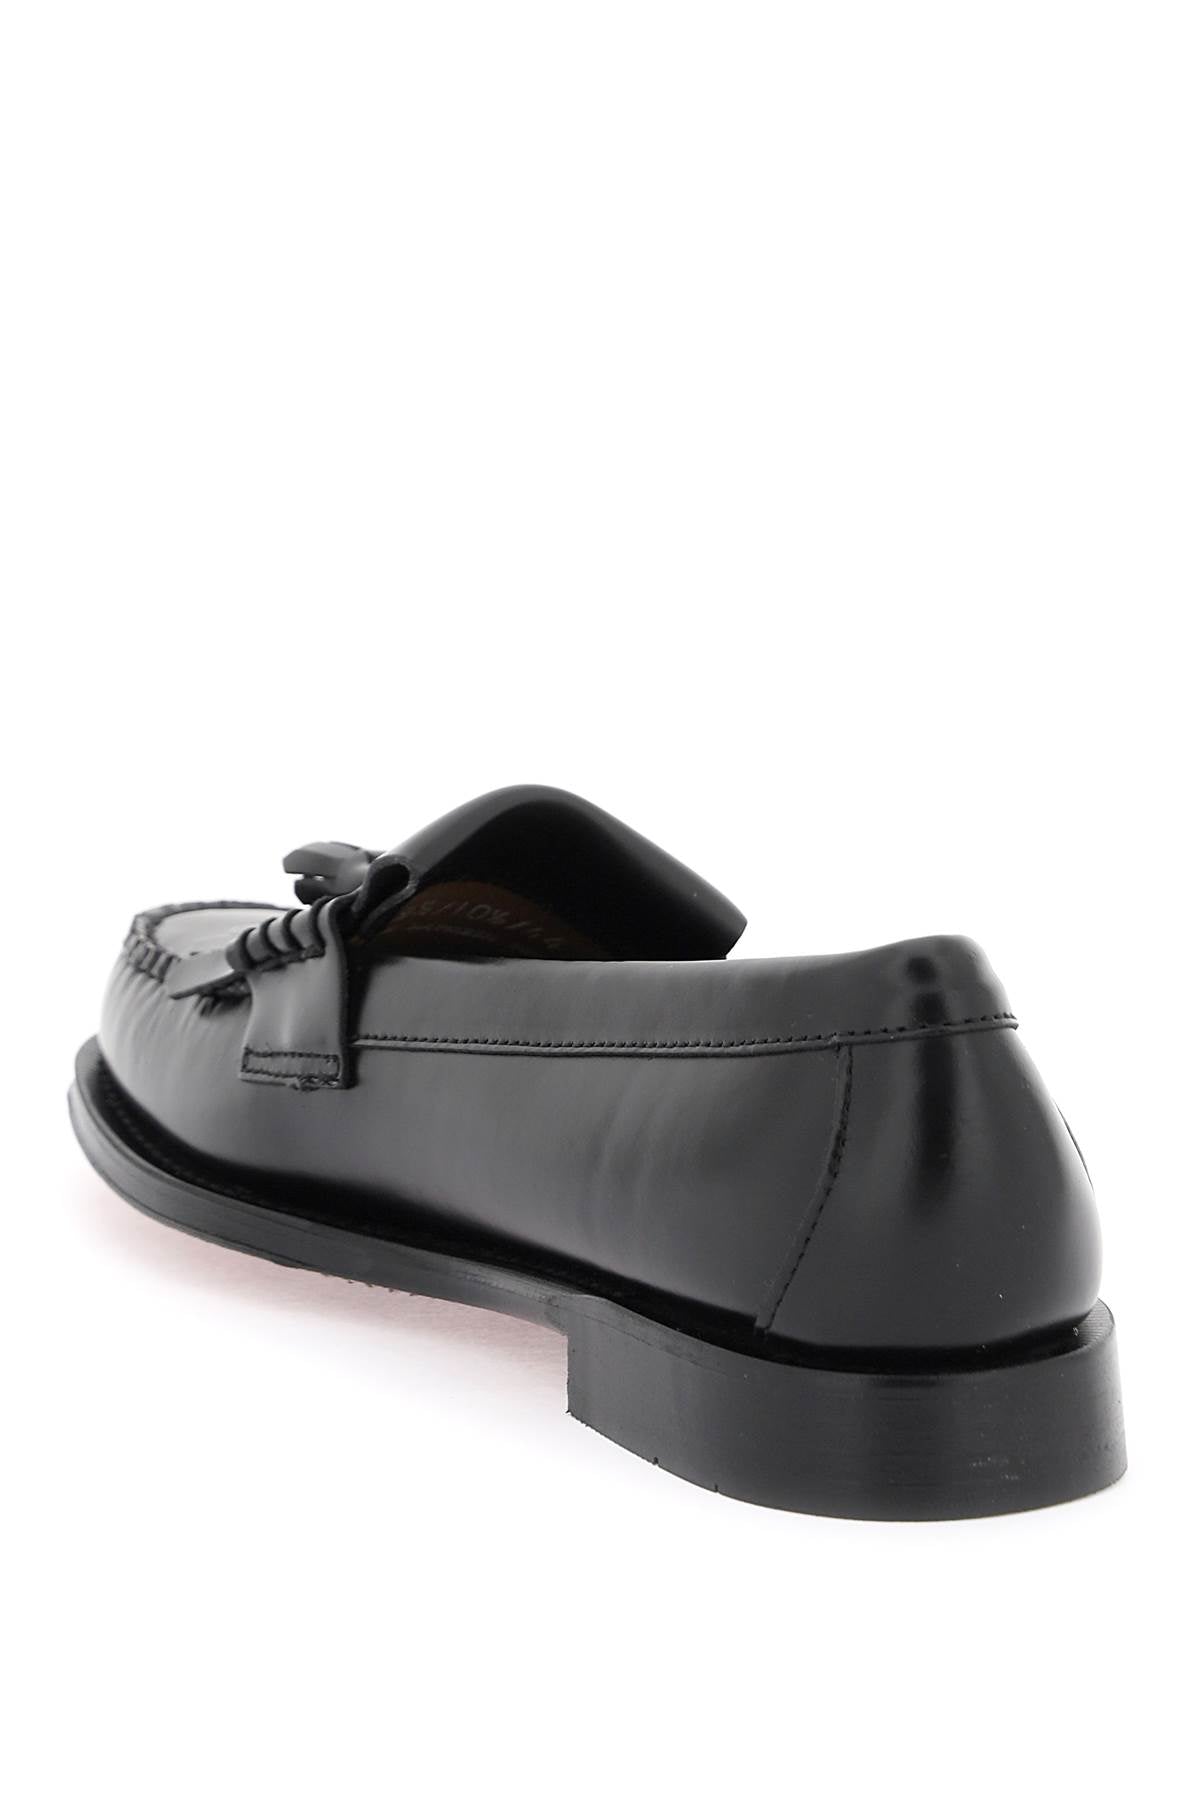 G.h. bass esther kiltie weejuns loafers in brushed leather-2